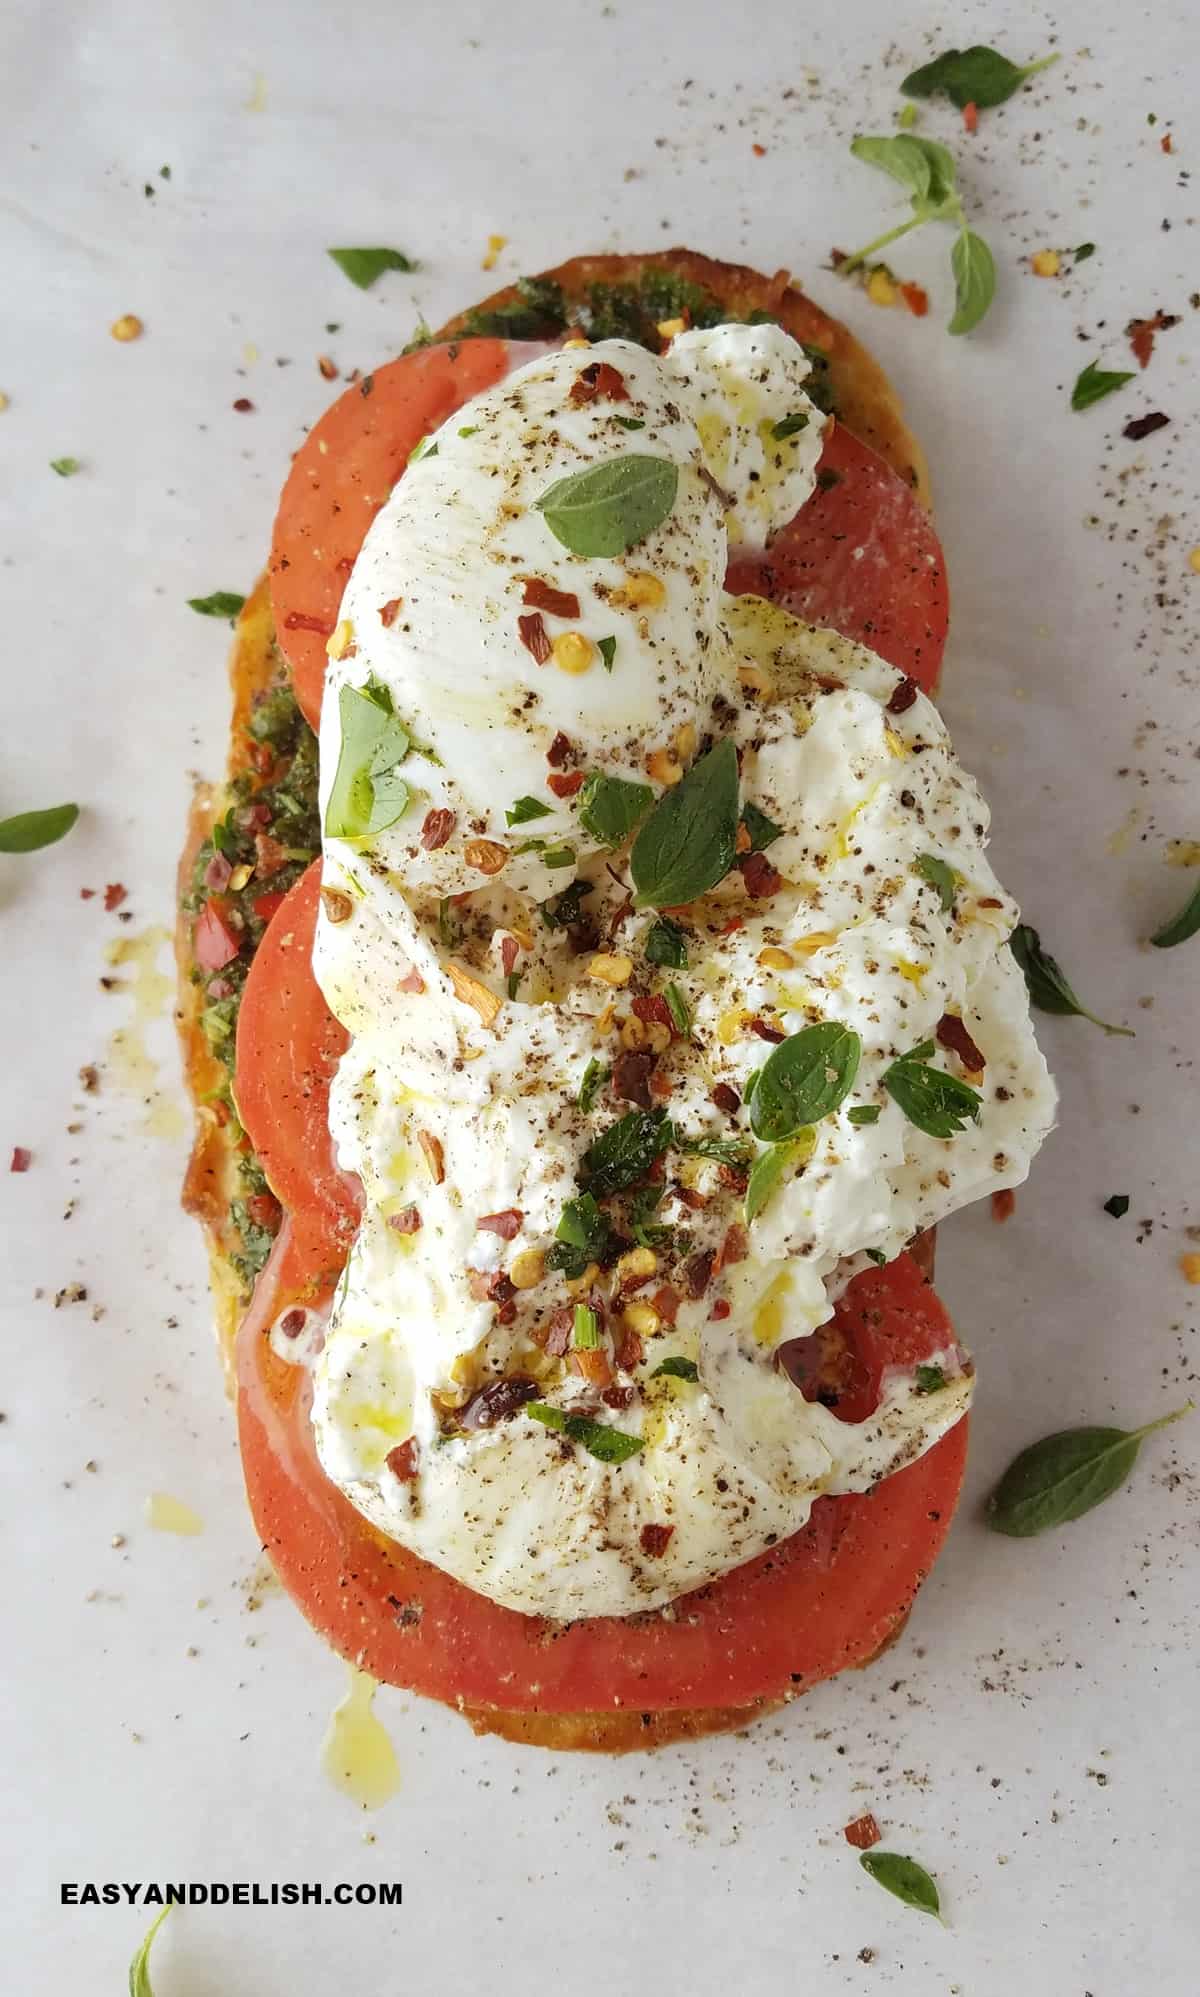 A burrata toast topped with herbs and seasoned with pepper and red pepper flakes.